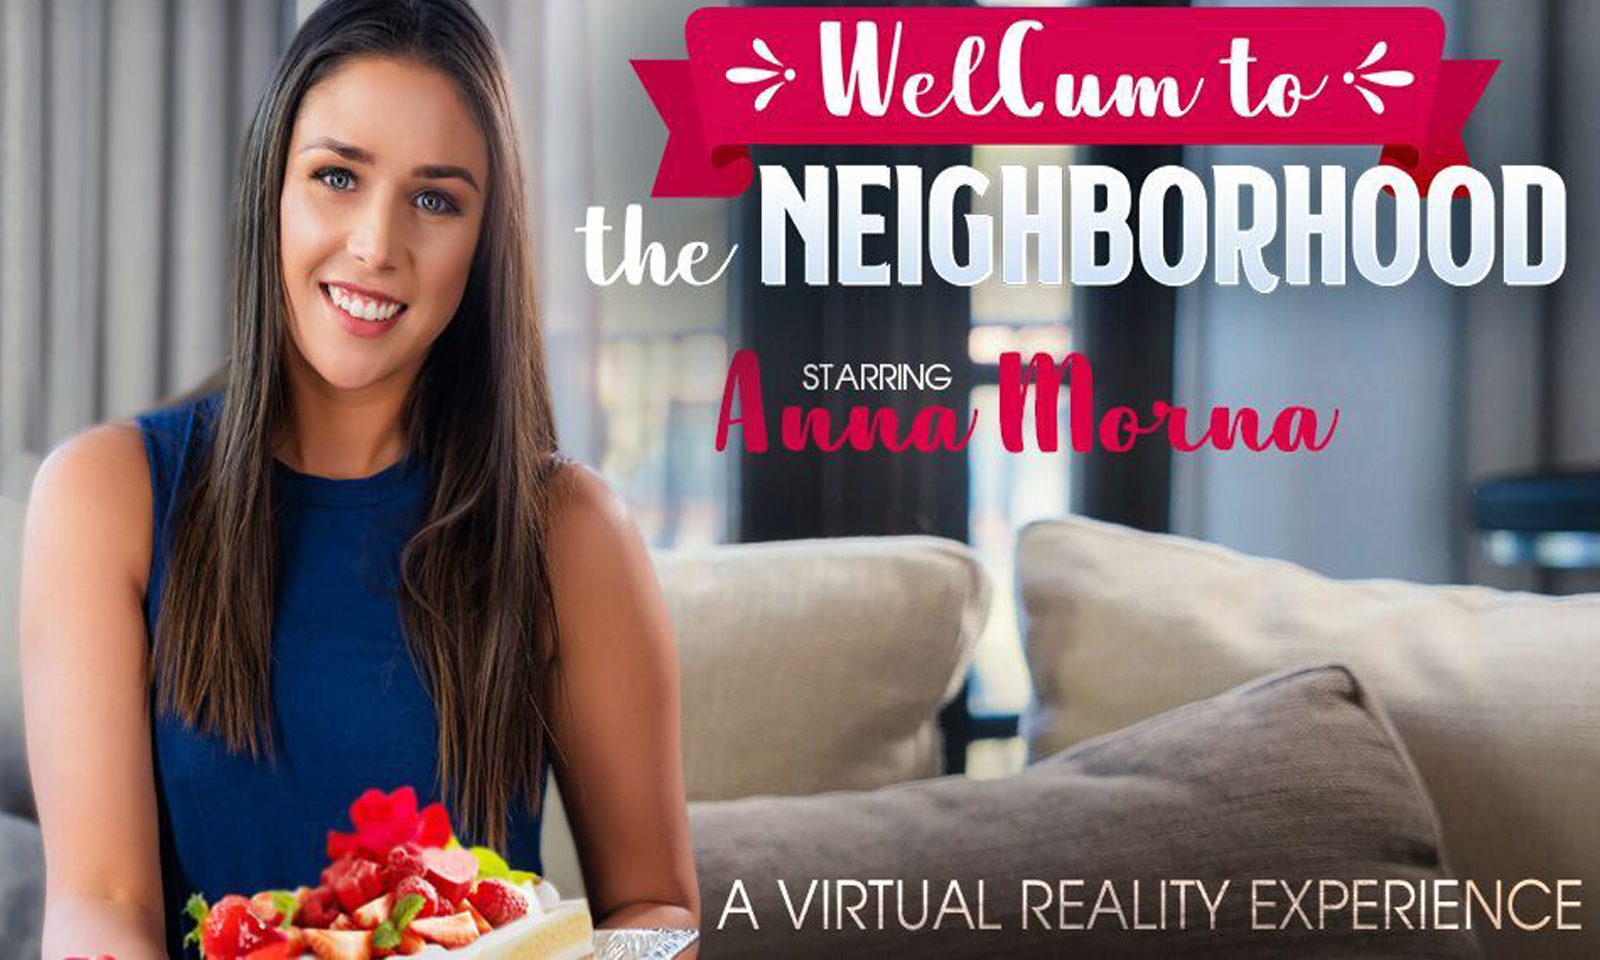 VR Bangers WelCums New Neighbors with a Visit from Anna Morna